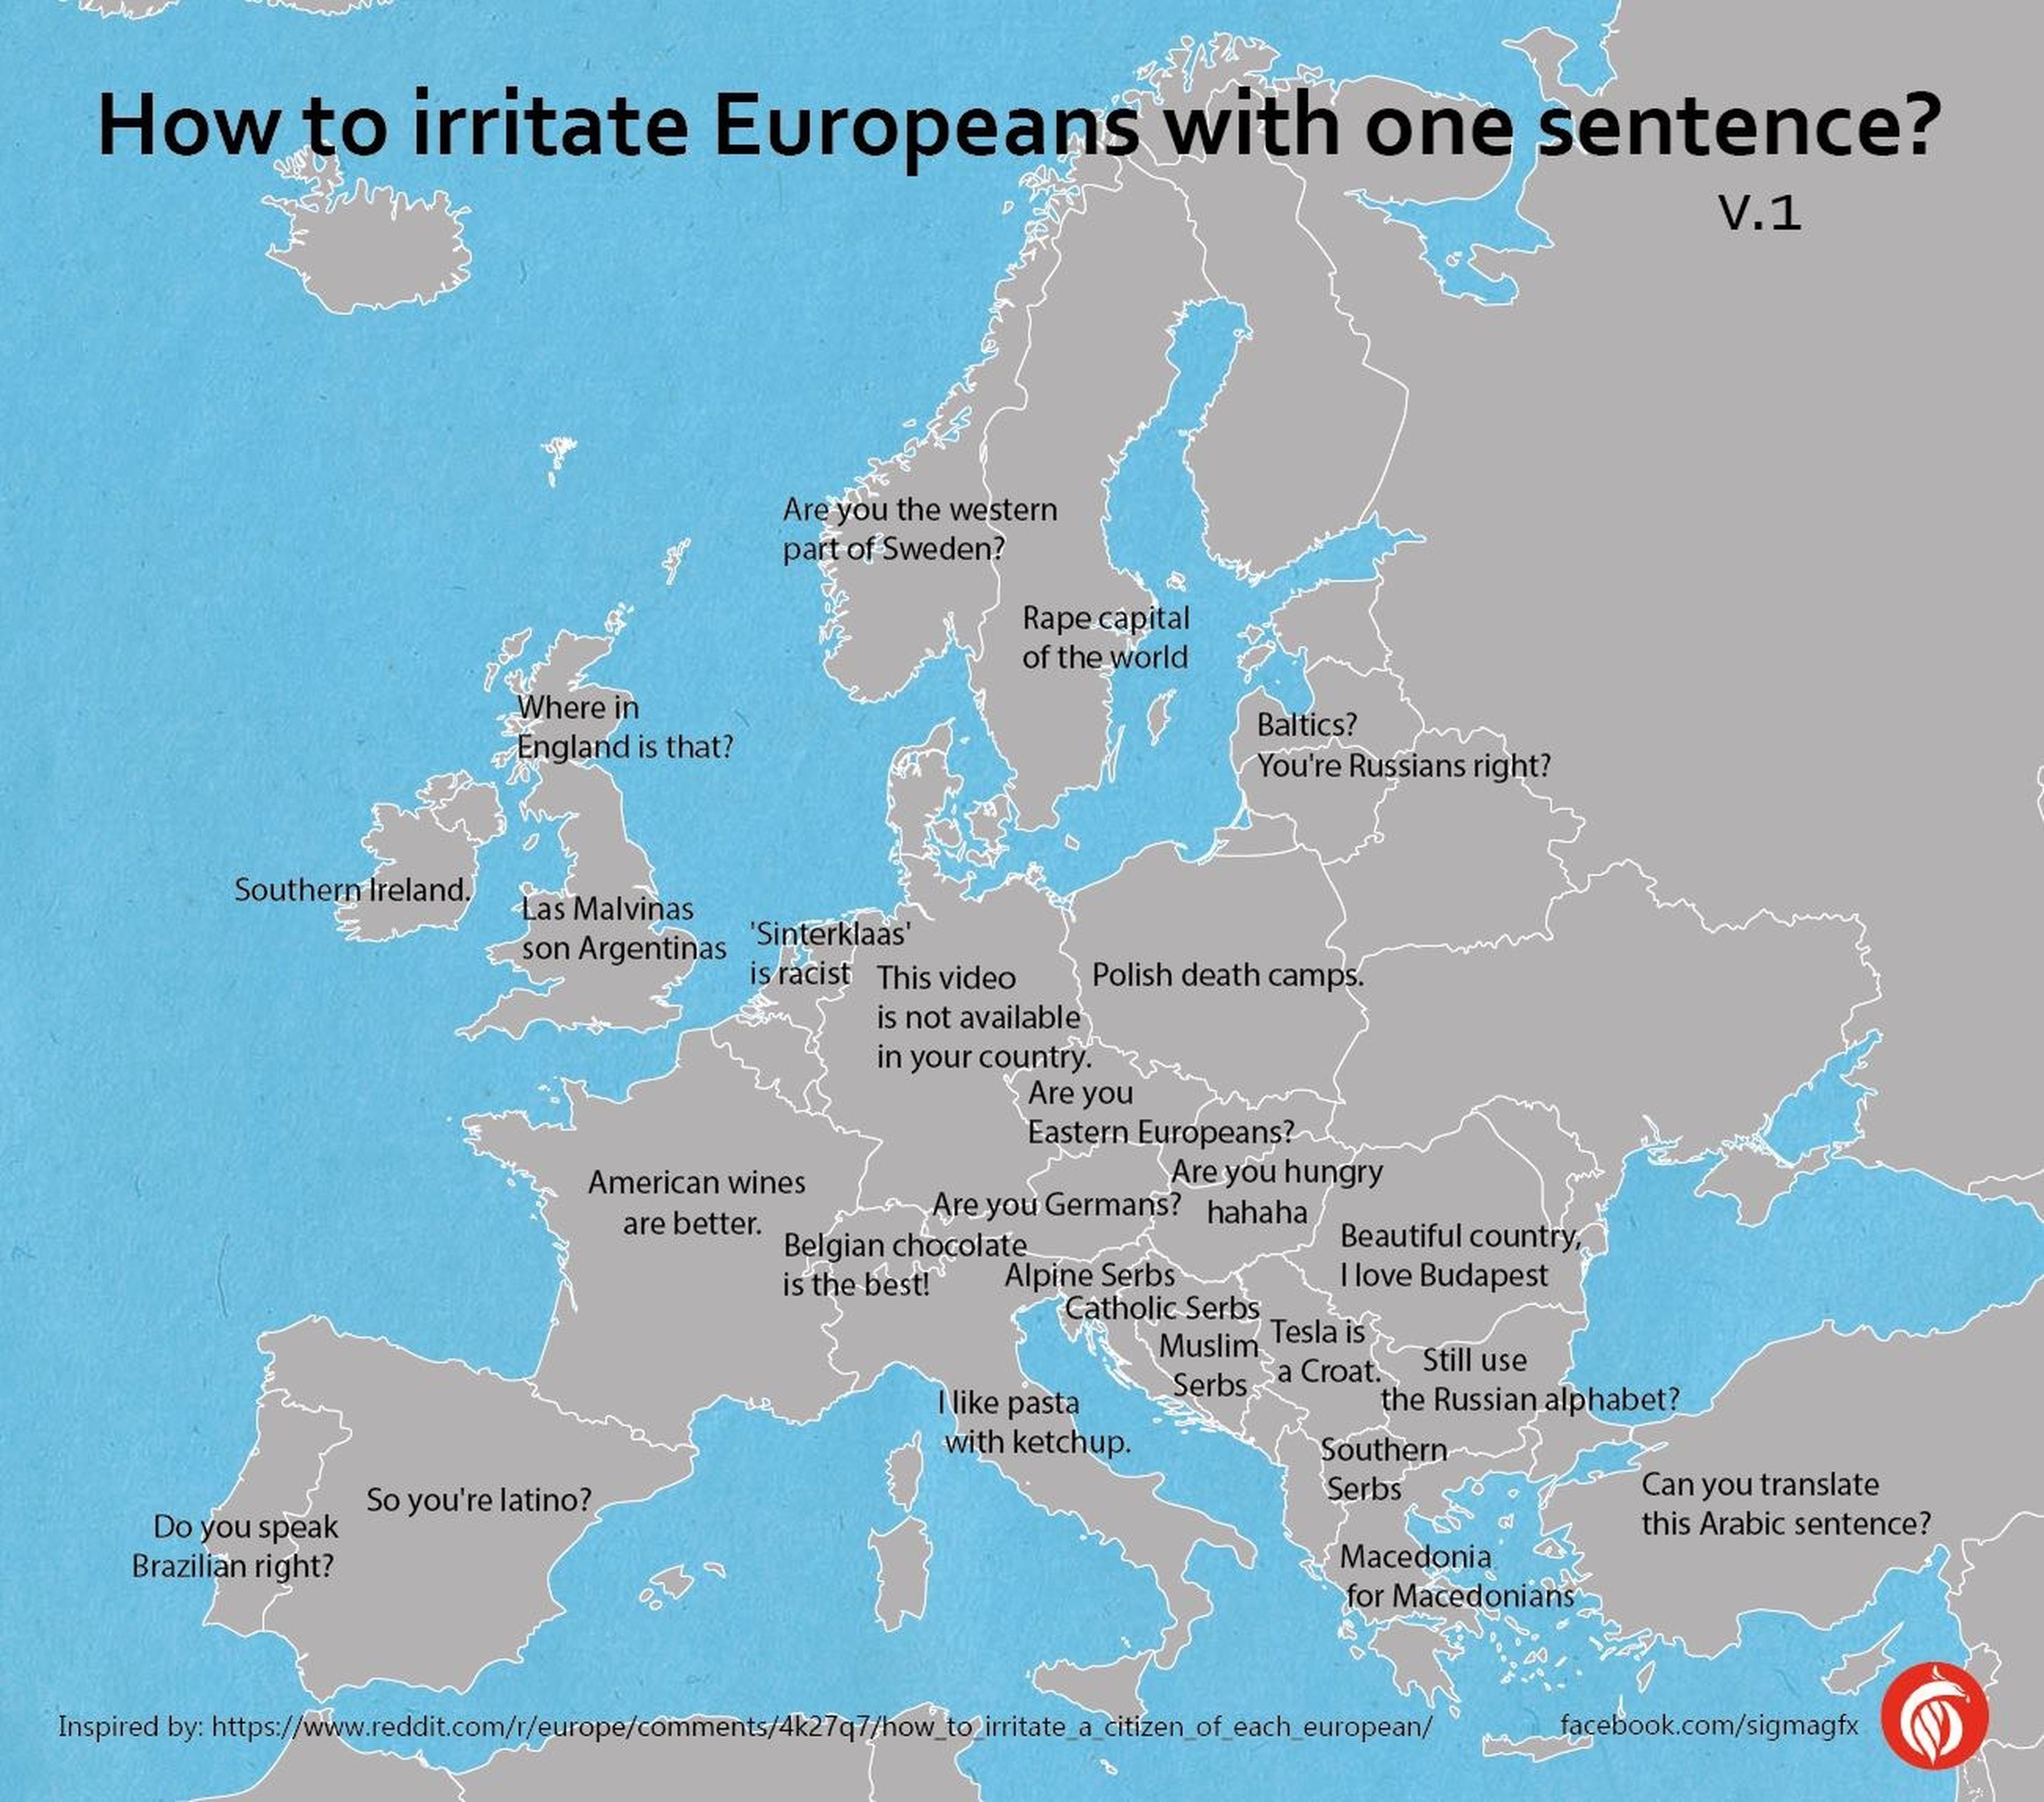 This map allows you to anger every country in Europe with just one sentence